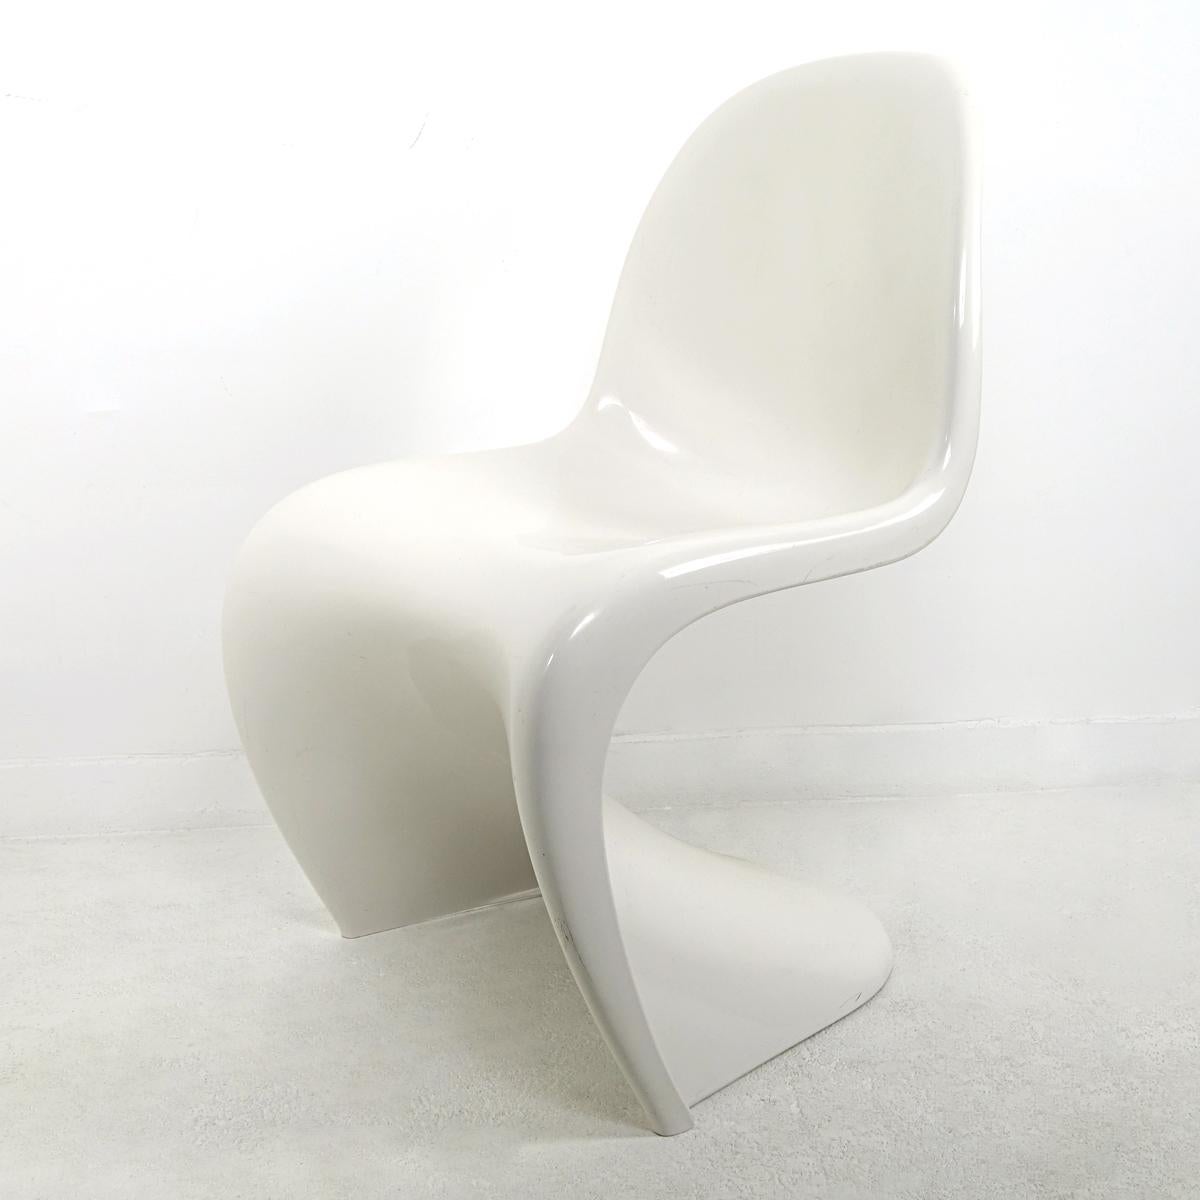 The S-chair by Verner Panton is one of the absolute stars of furniture pop art.
This is the original version of the Herman Miller Fehlbaum Production in the beautiful glossy thermoplastic that suits the design so well.